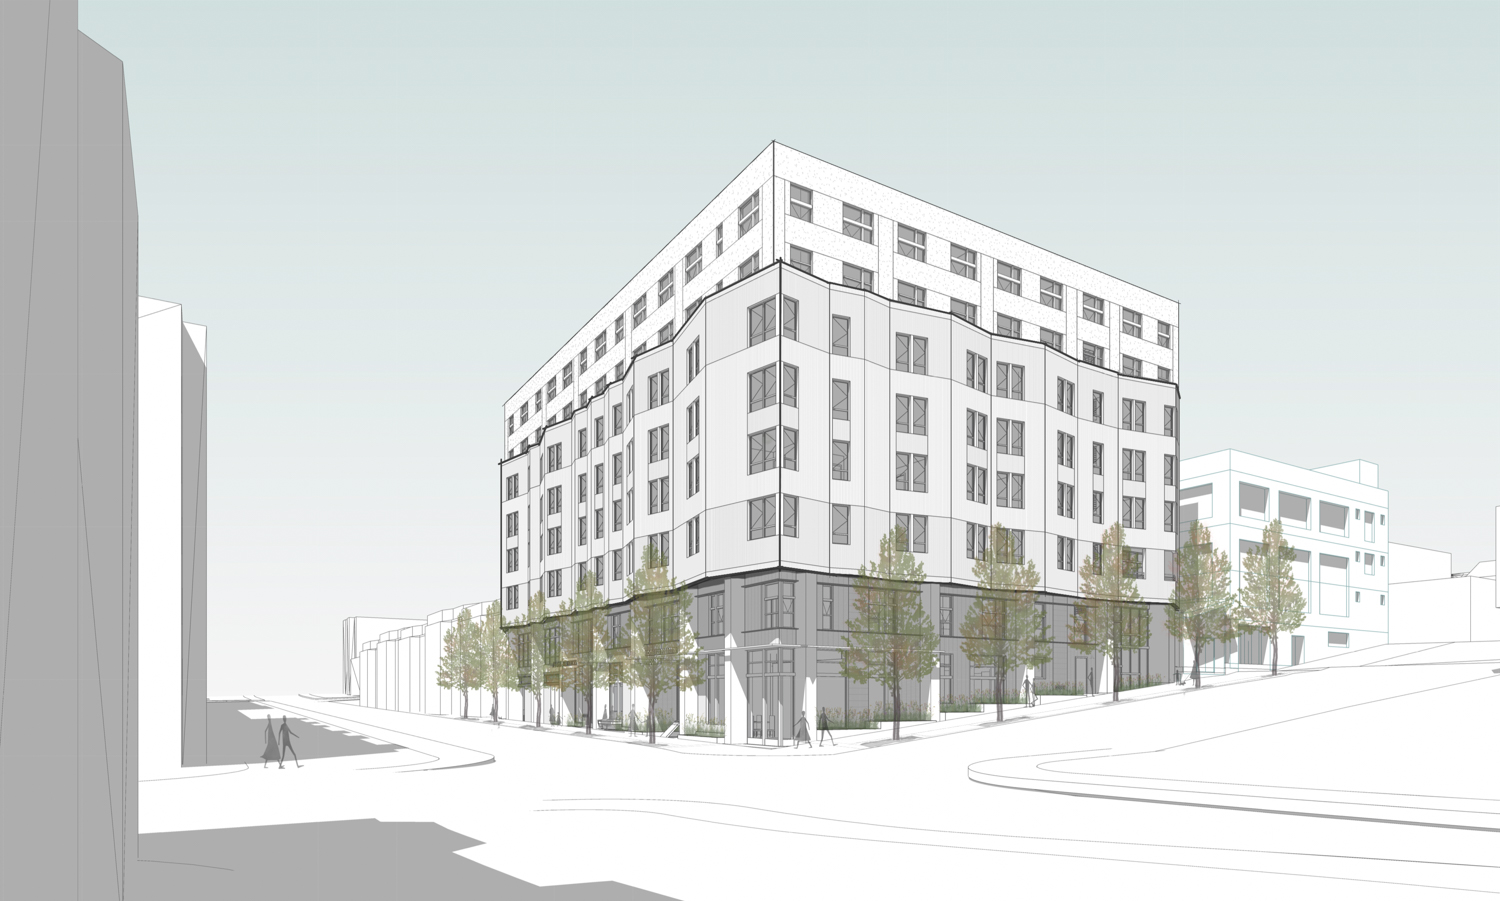 2530 18th Street, rendering by Mithun